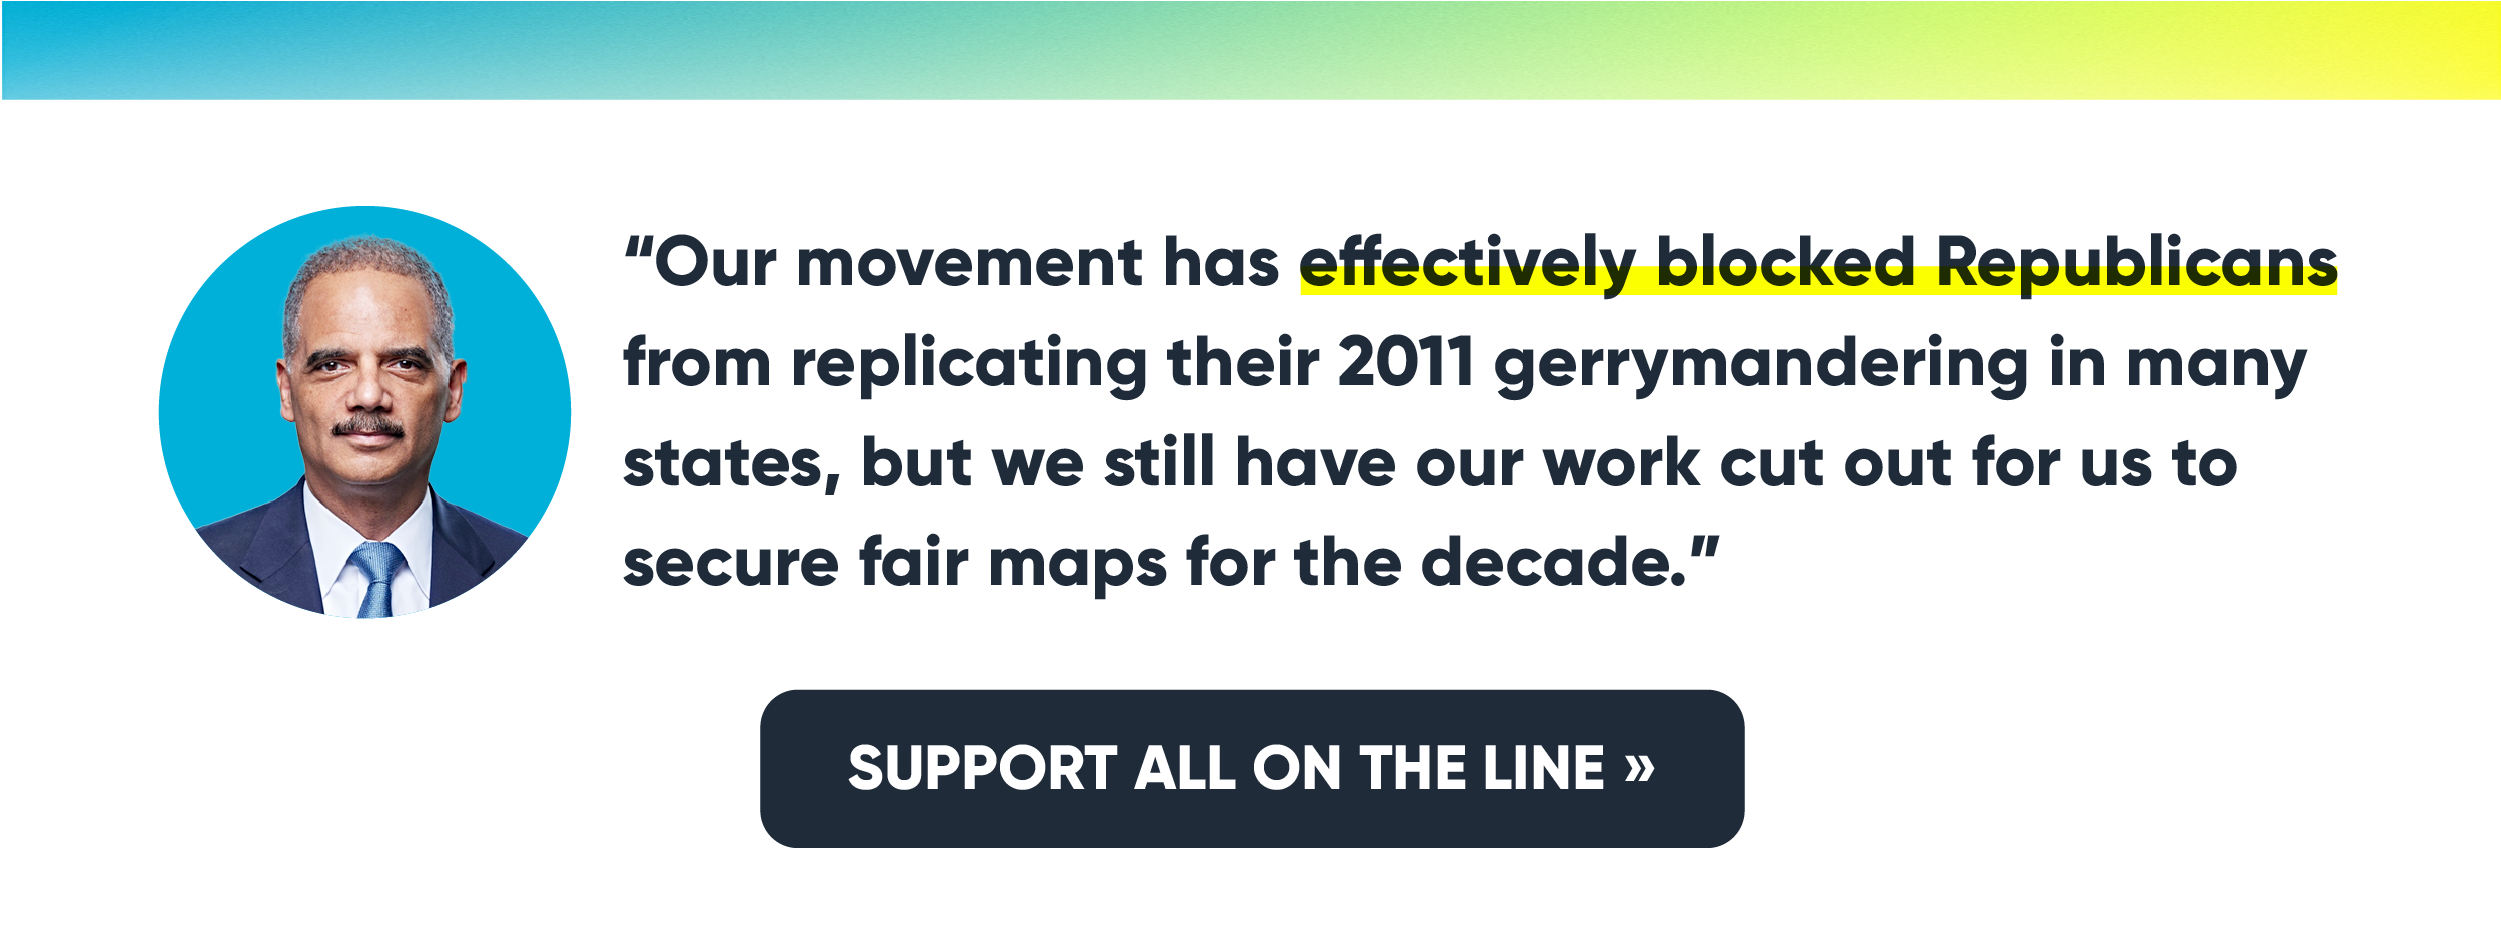 “Our movement has effectively blocked Republicans from replicating their 2011 gerrymandering in many states, but we still have our work cut out for us to secure fair maps for the decade.” -- A.G. Holder